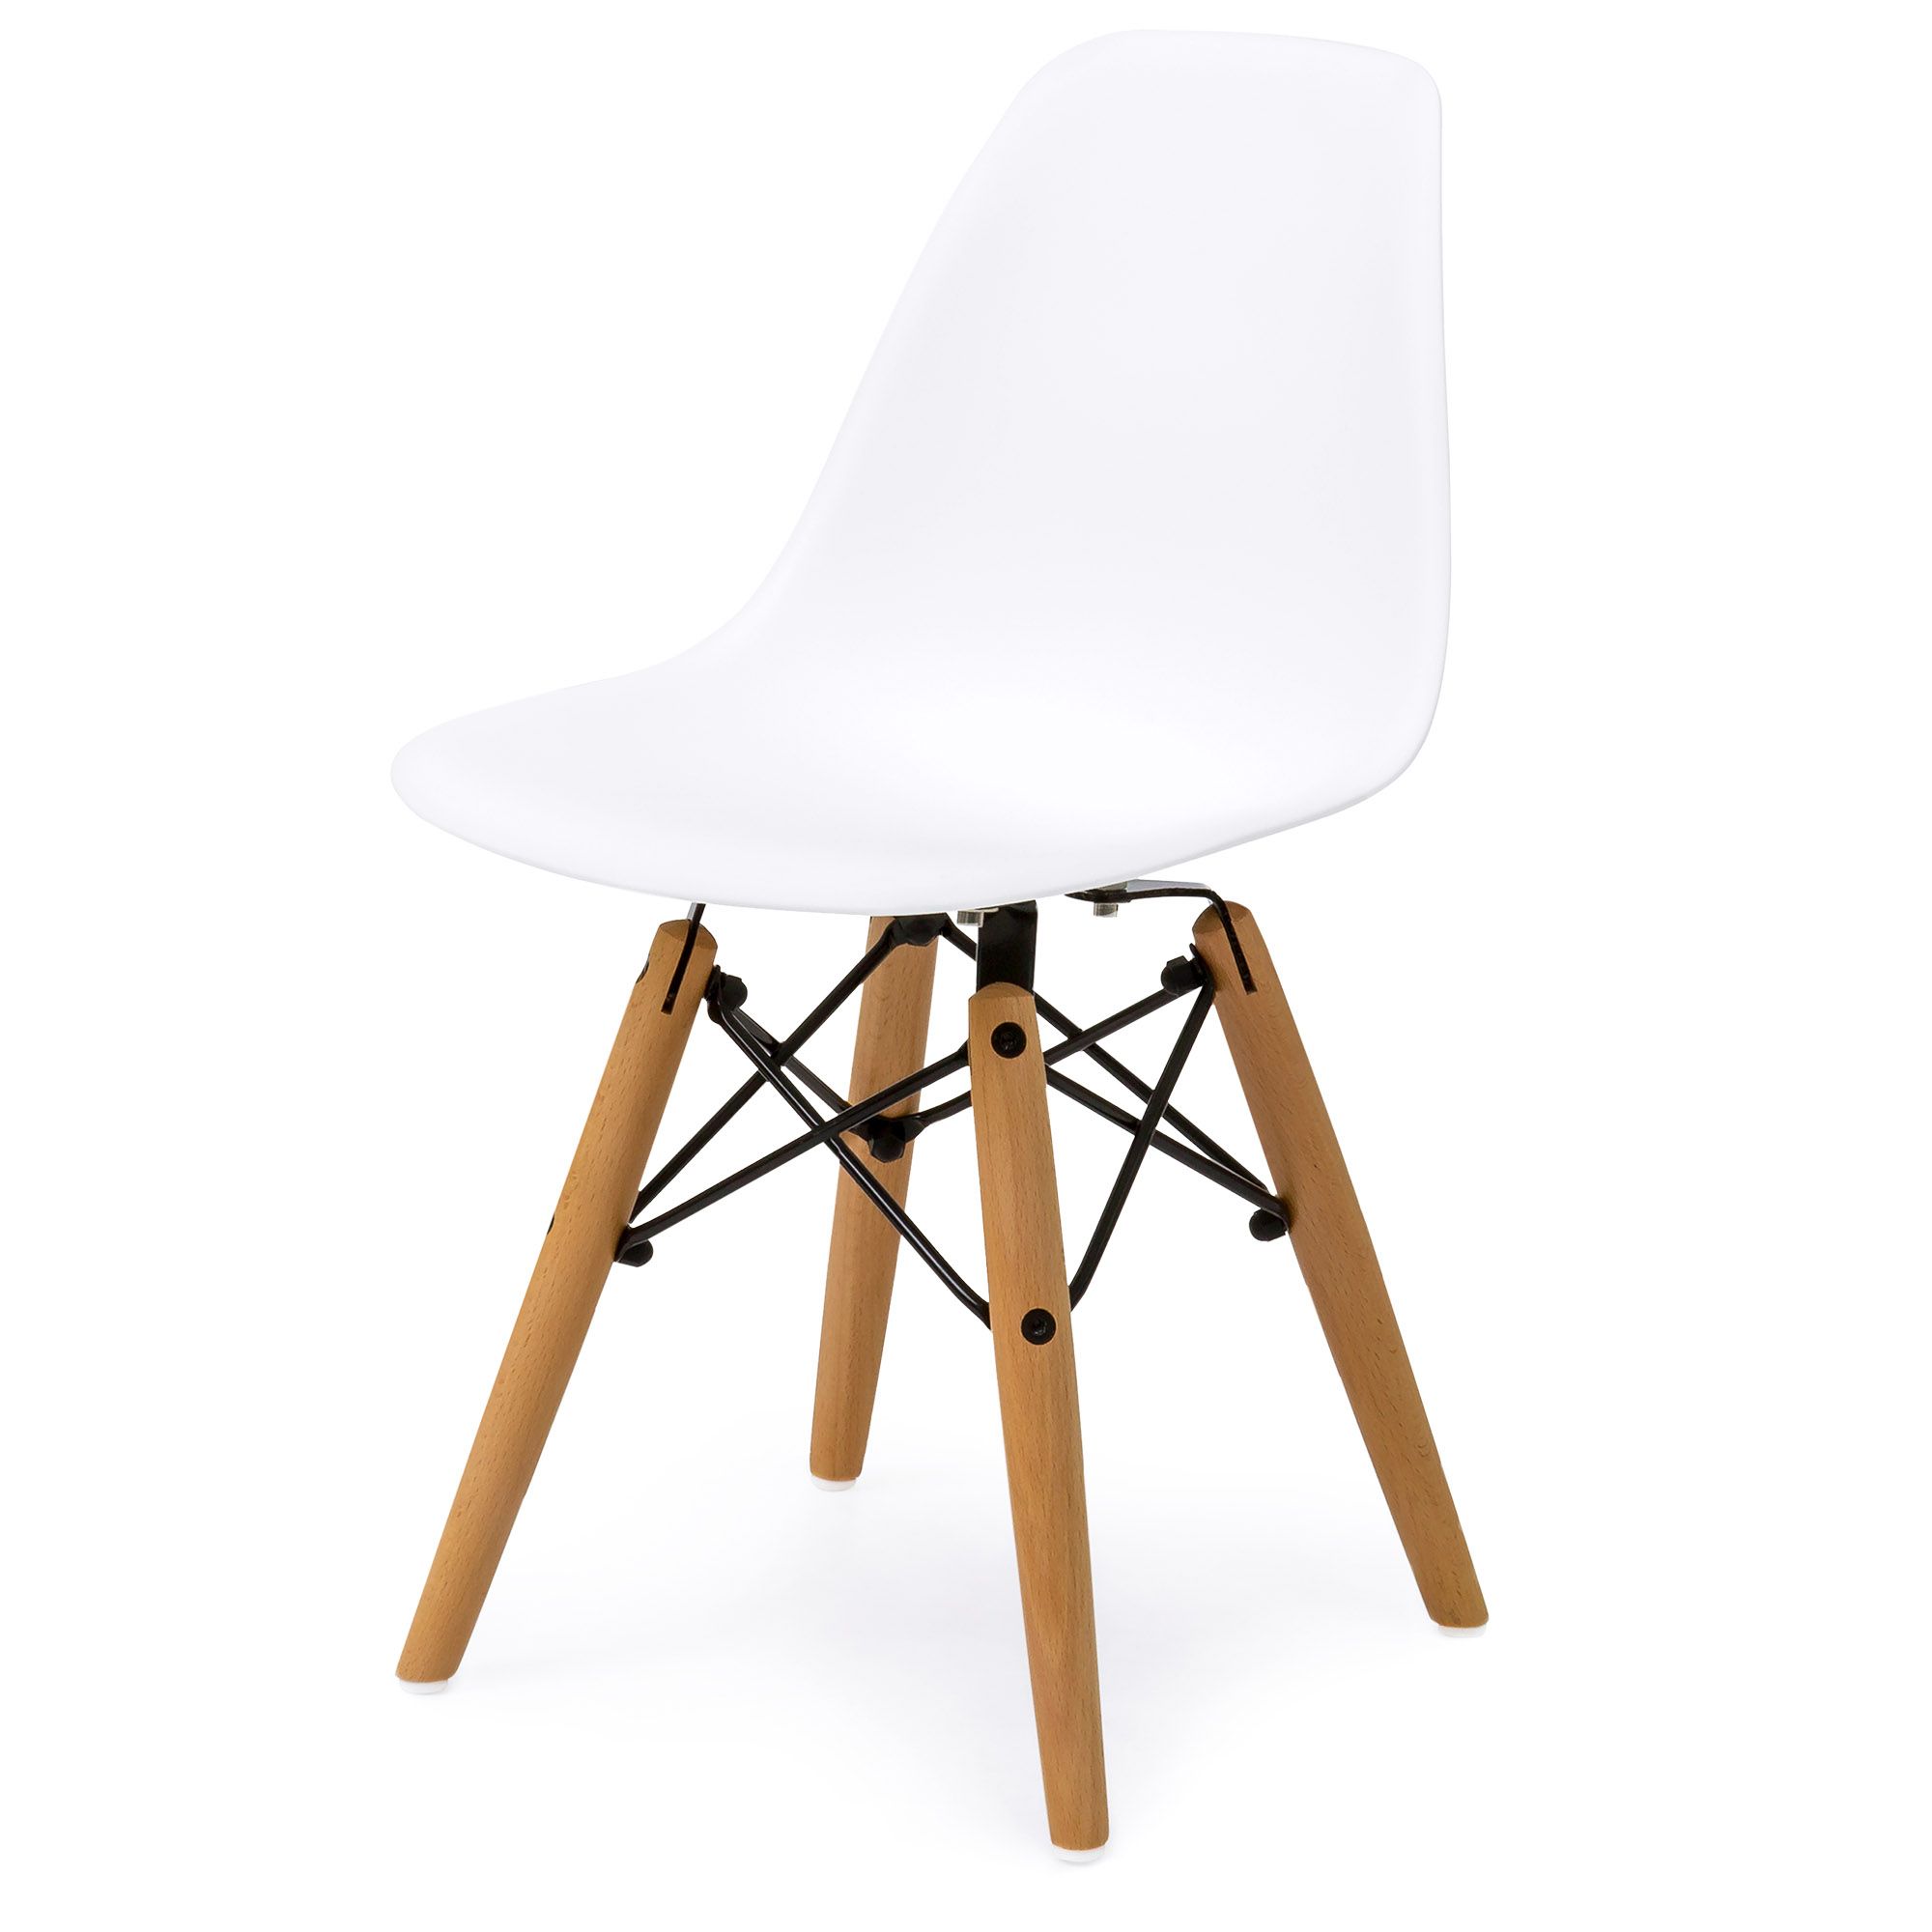 Eames Style Dining Tables With Wooden Legs Within 2018 White Best Choice Products Kids Mid Century Modern Mini (View 26 of 30)